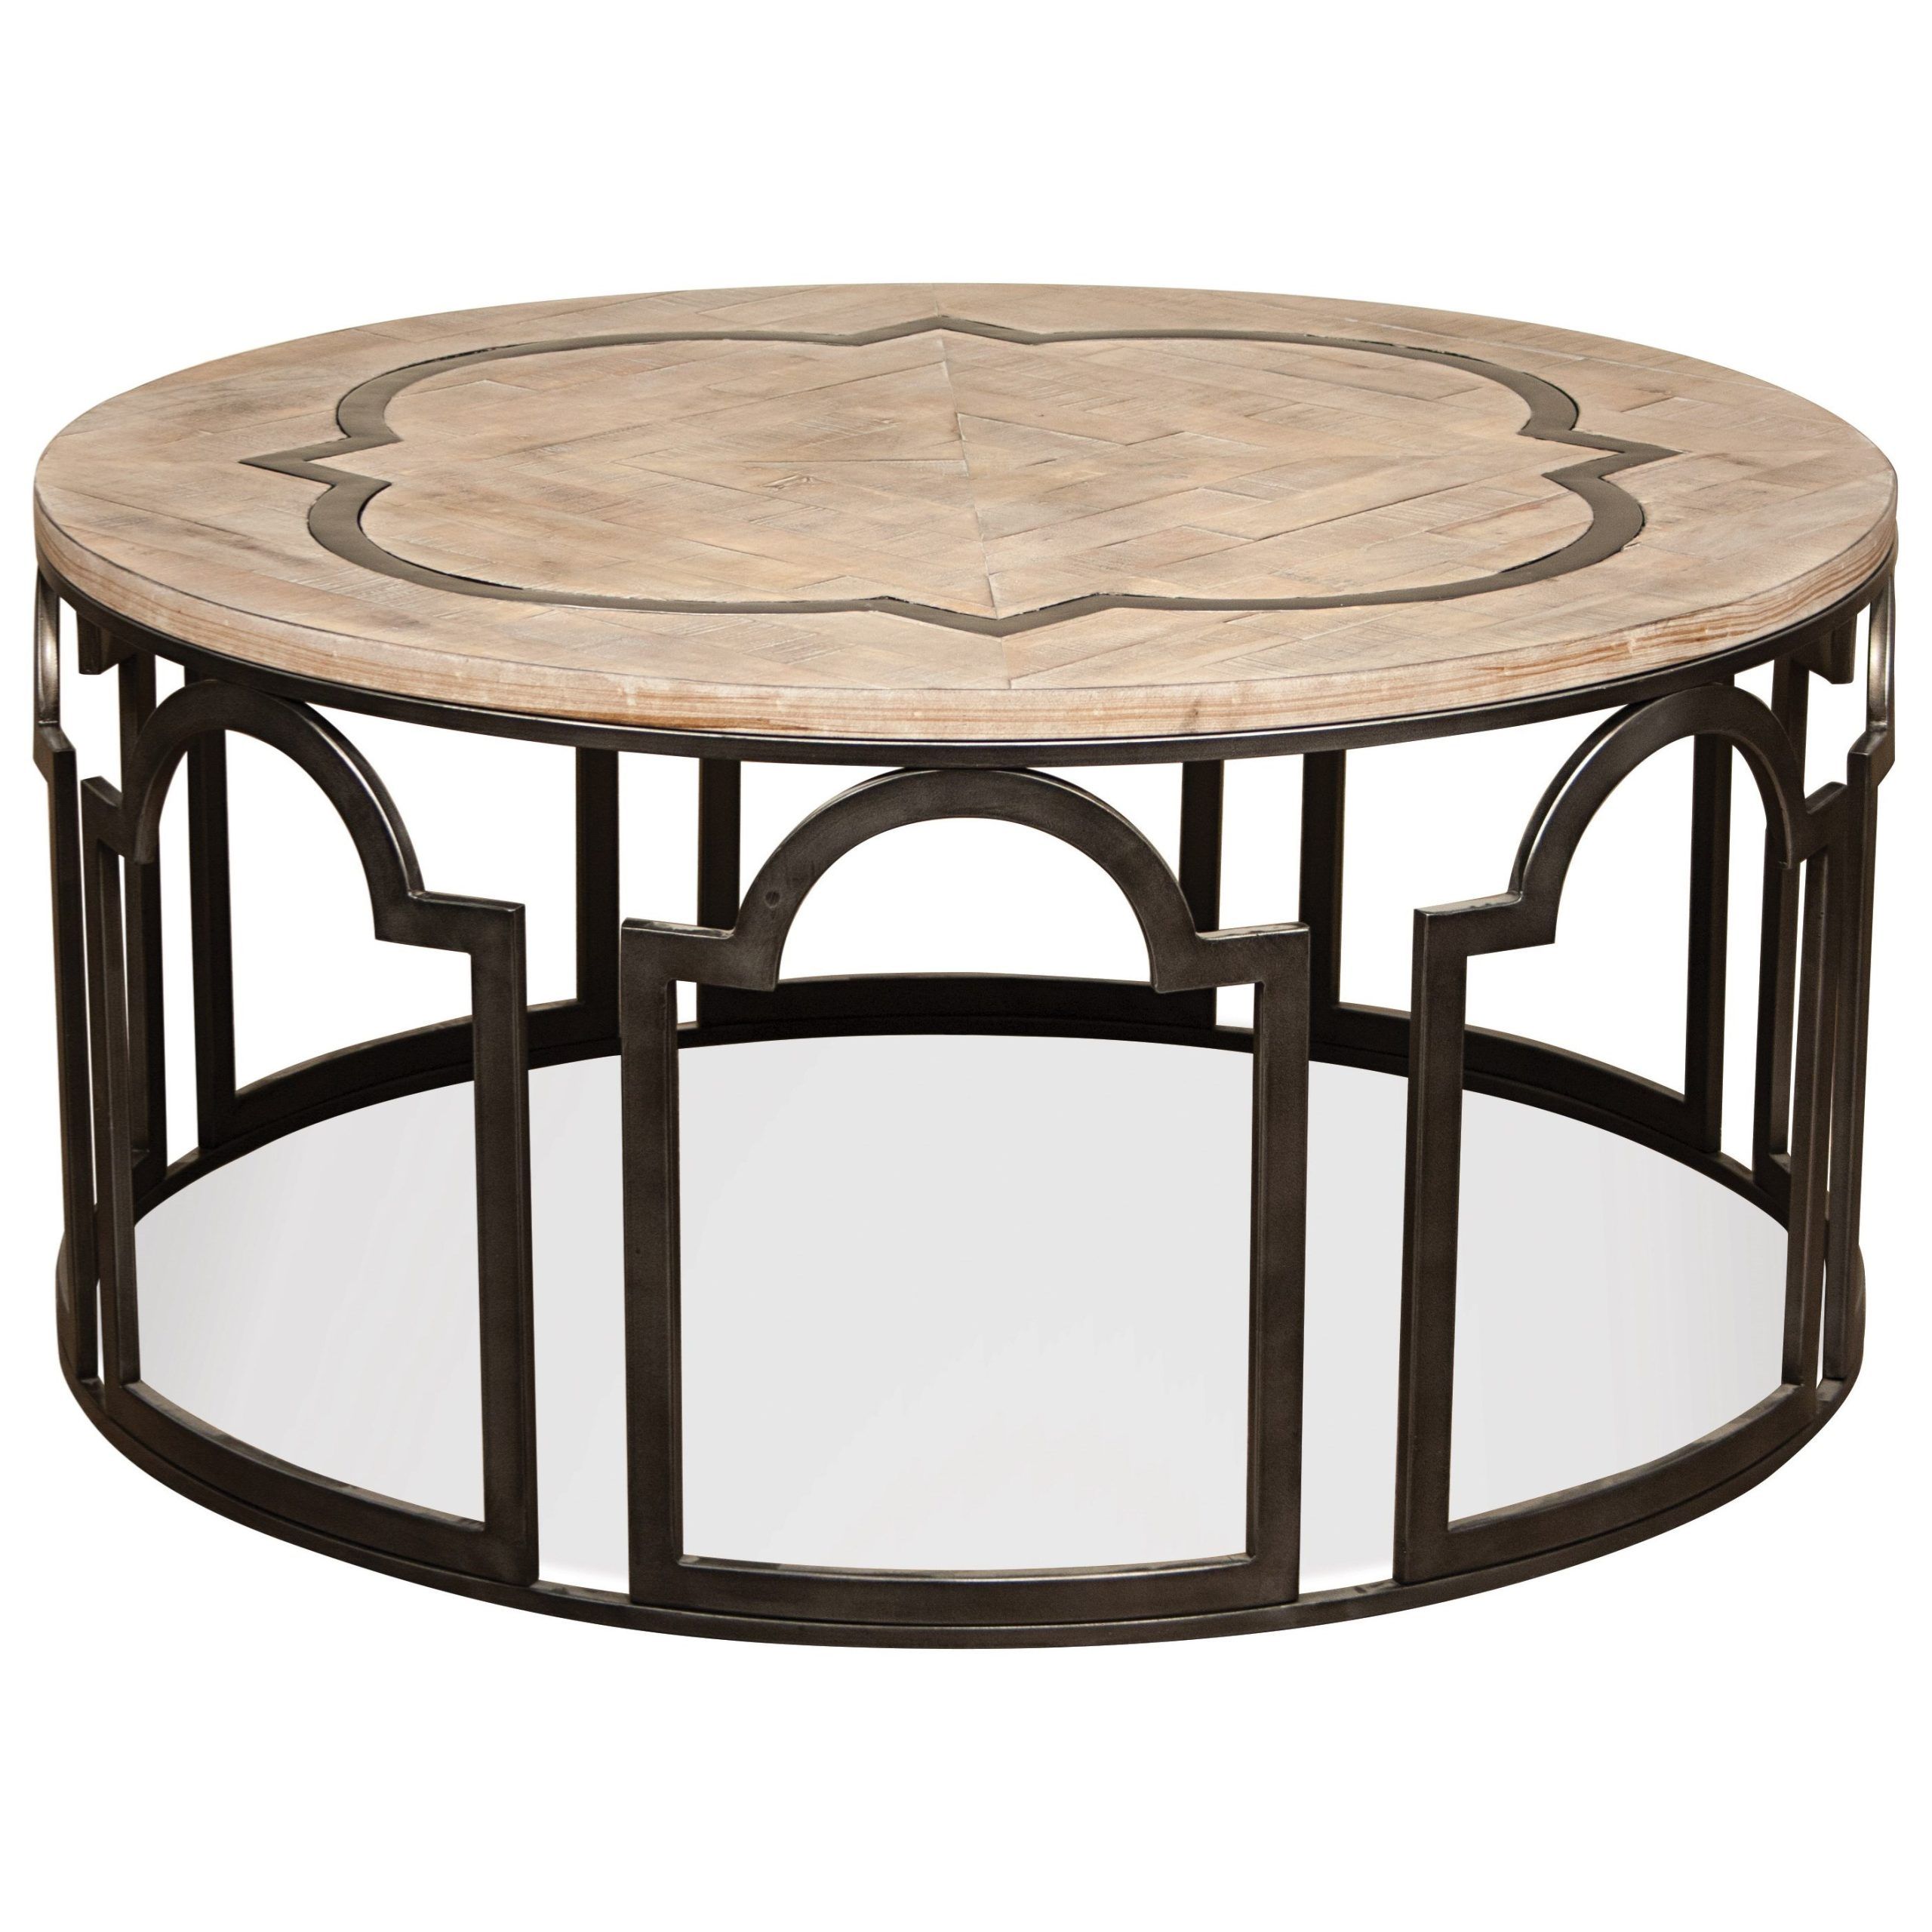 2020 Gray Coastal Cocktail Tables Pertaining To Riverside Furniture Estelle 20102 Contemporary Rustic Round Cocktail (View 14 of 15)